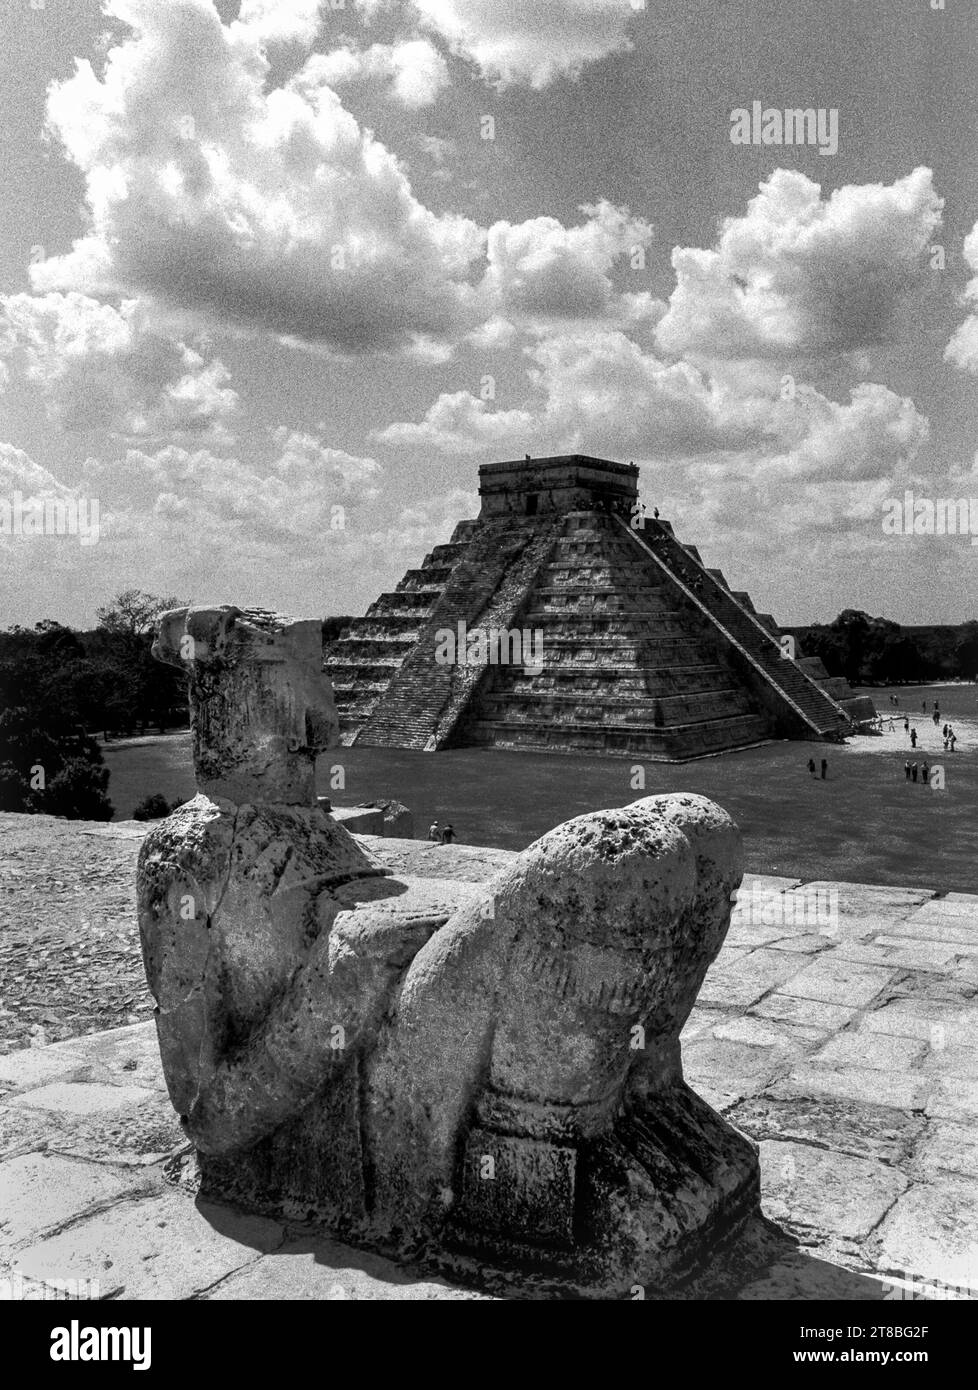 Mexico, Yucatan, Chichen Itza:The Mayan Chac Mool statue in the foreground and the pyramid of Temple of the Warriors in the background Stock Photo